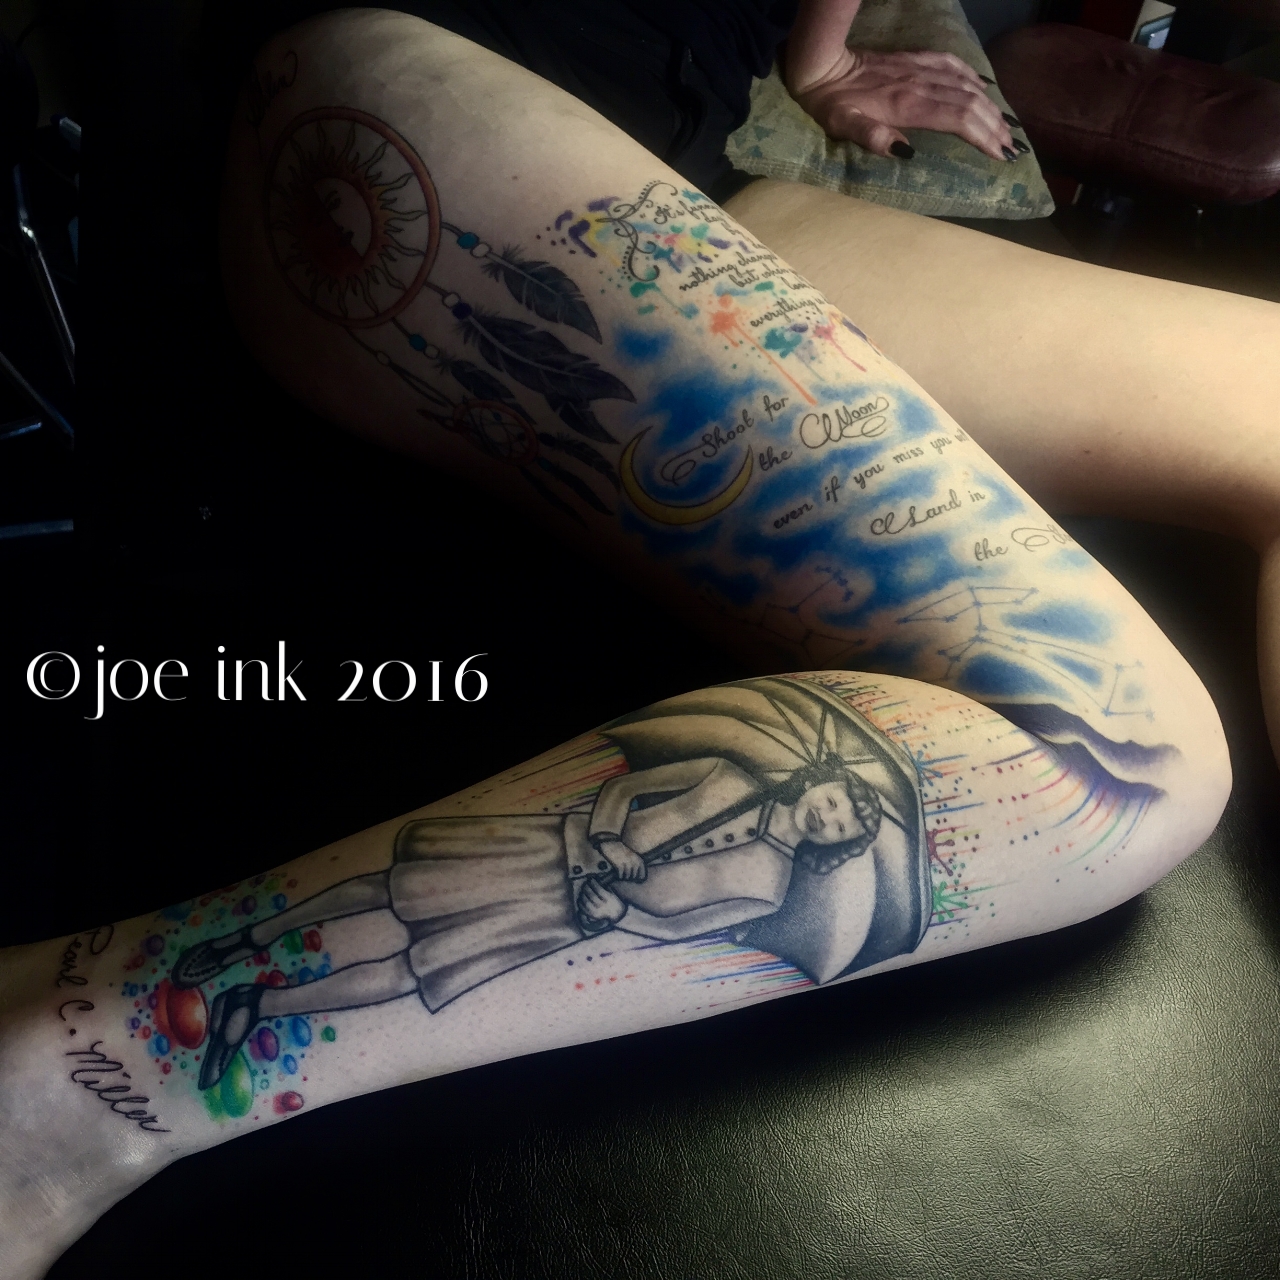 Tattoo's…Piercings…Oh My! – offwiththefairies